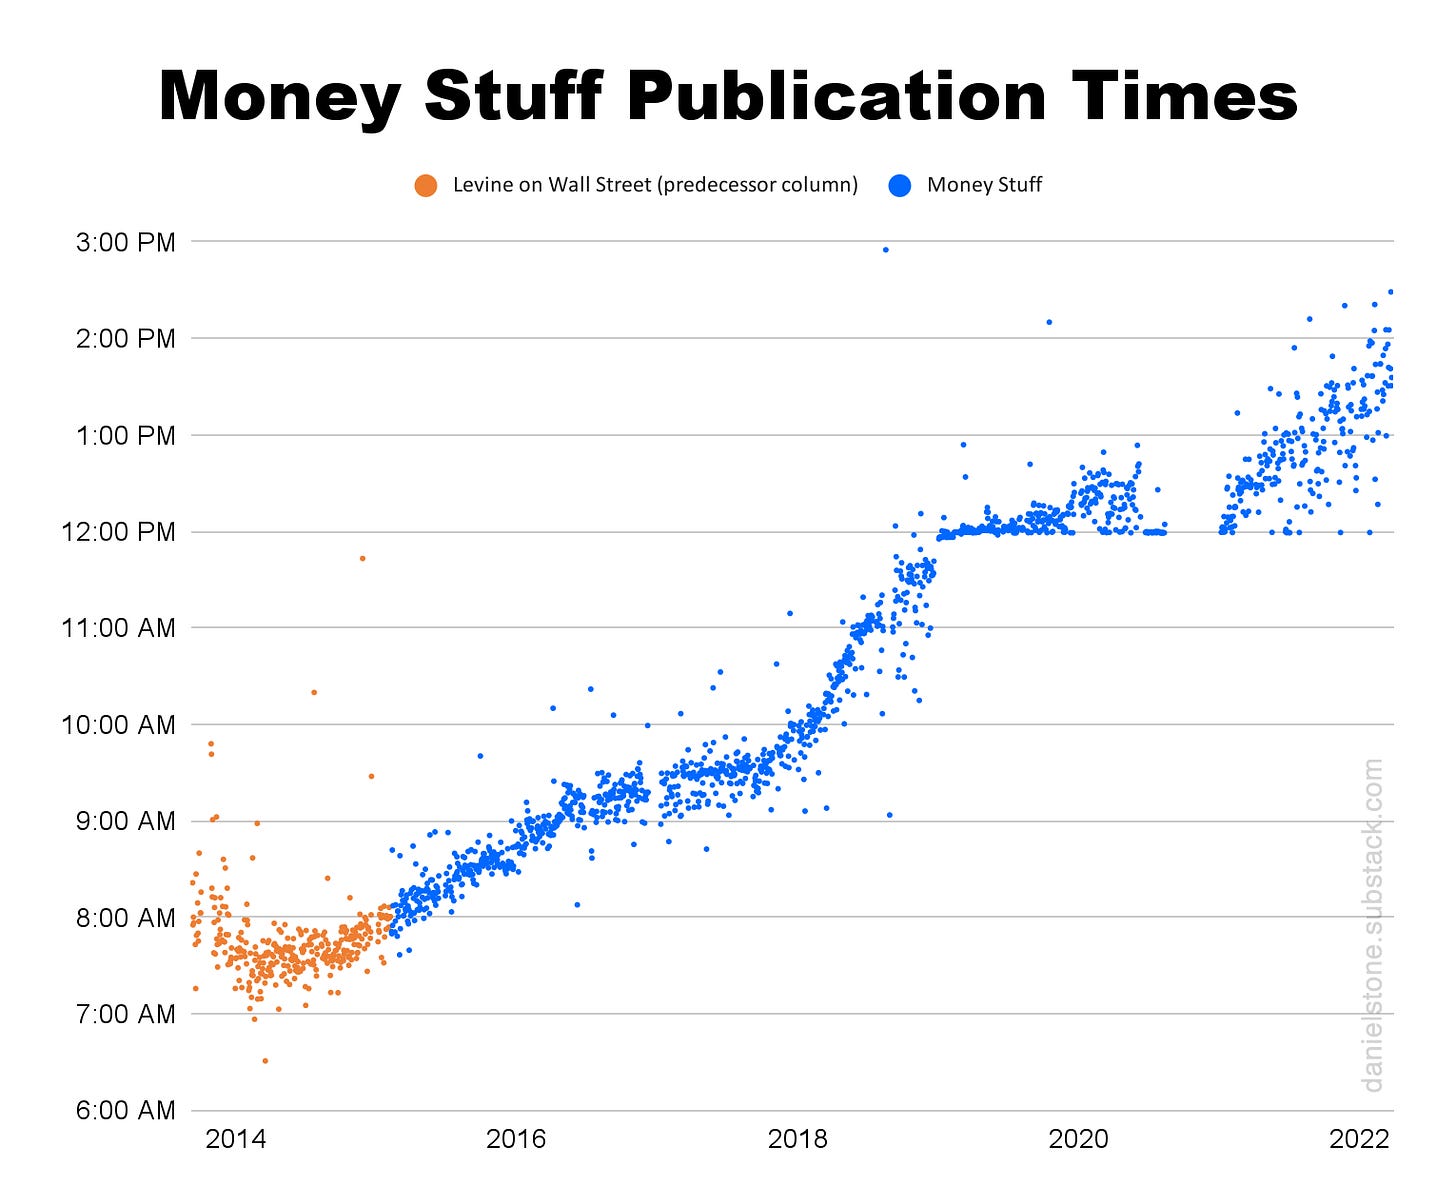 Chart by Dan Stone of the send time of every Money Stuff post since it launched as “Levine on Wall Street” in 2014. It’s bizarrely almost an up-and-right 45 degree line, with a bench at noon starting around 2019 where clearly early posts were scheduled to go out at noon. There are fewer and fewer of those lately though!